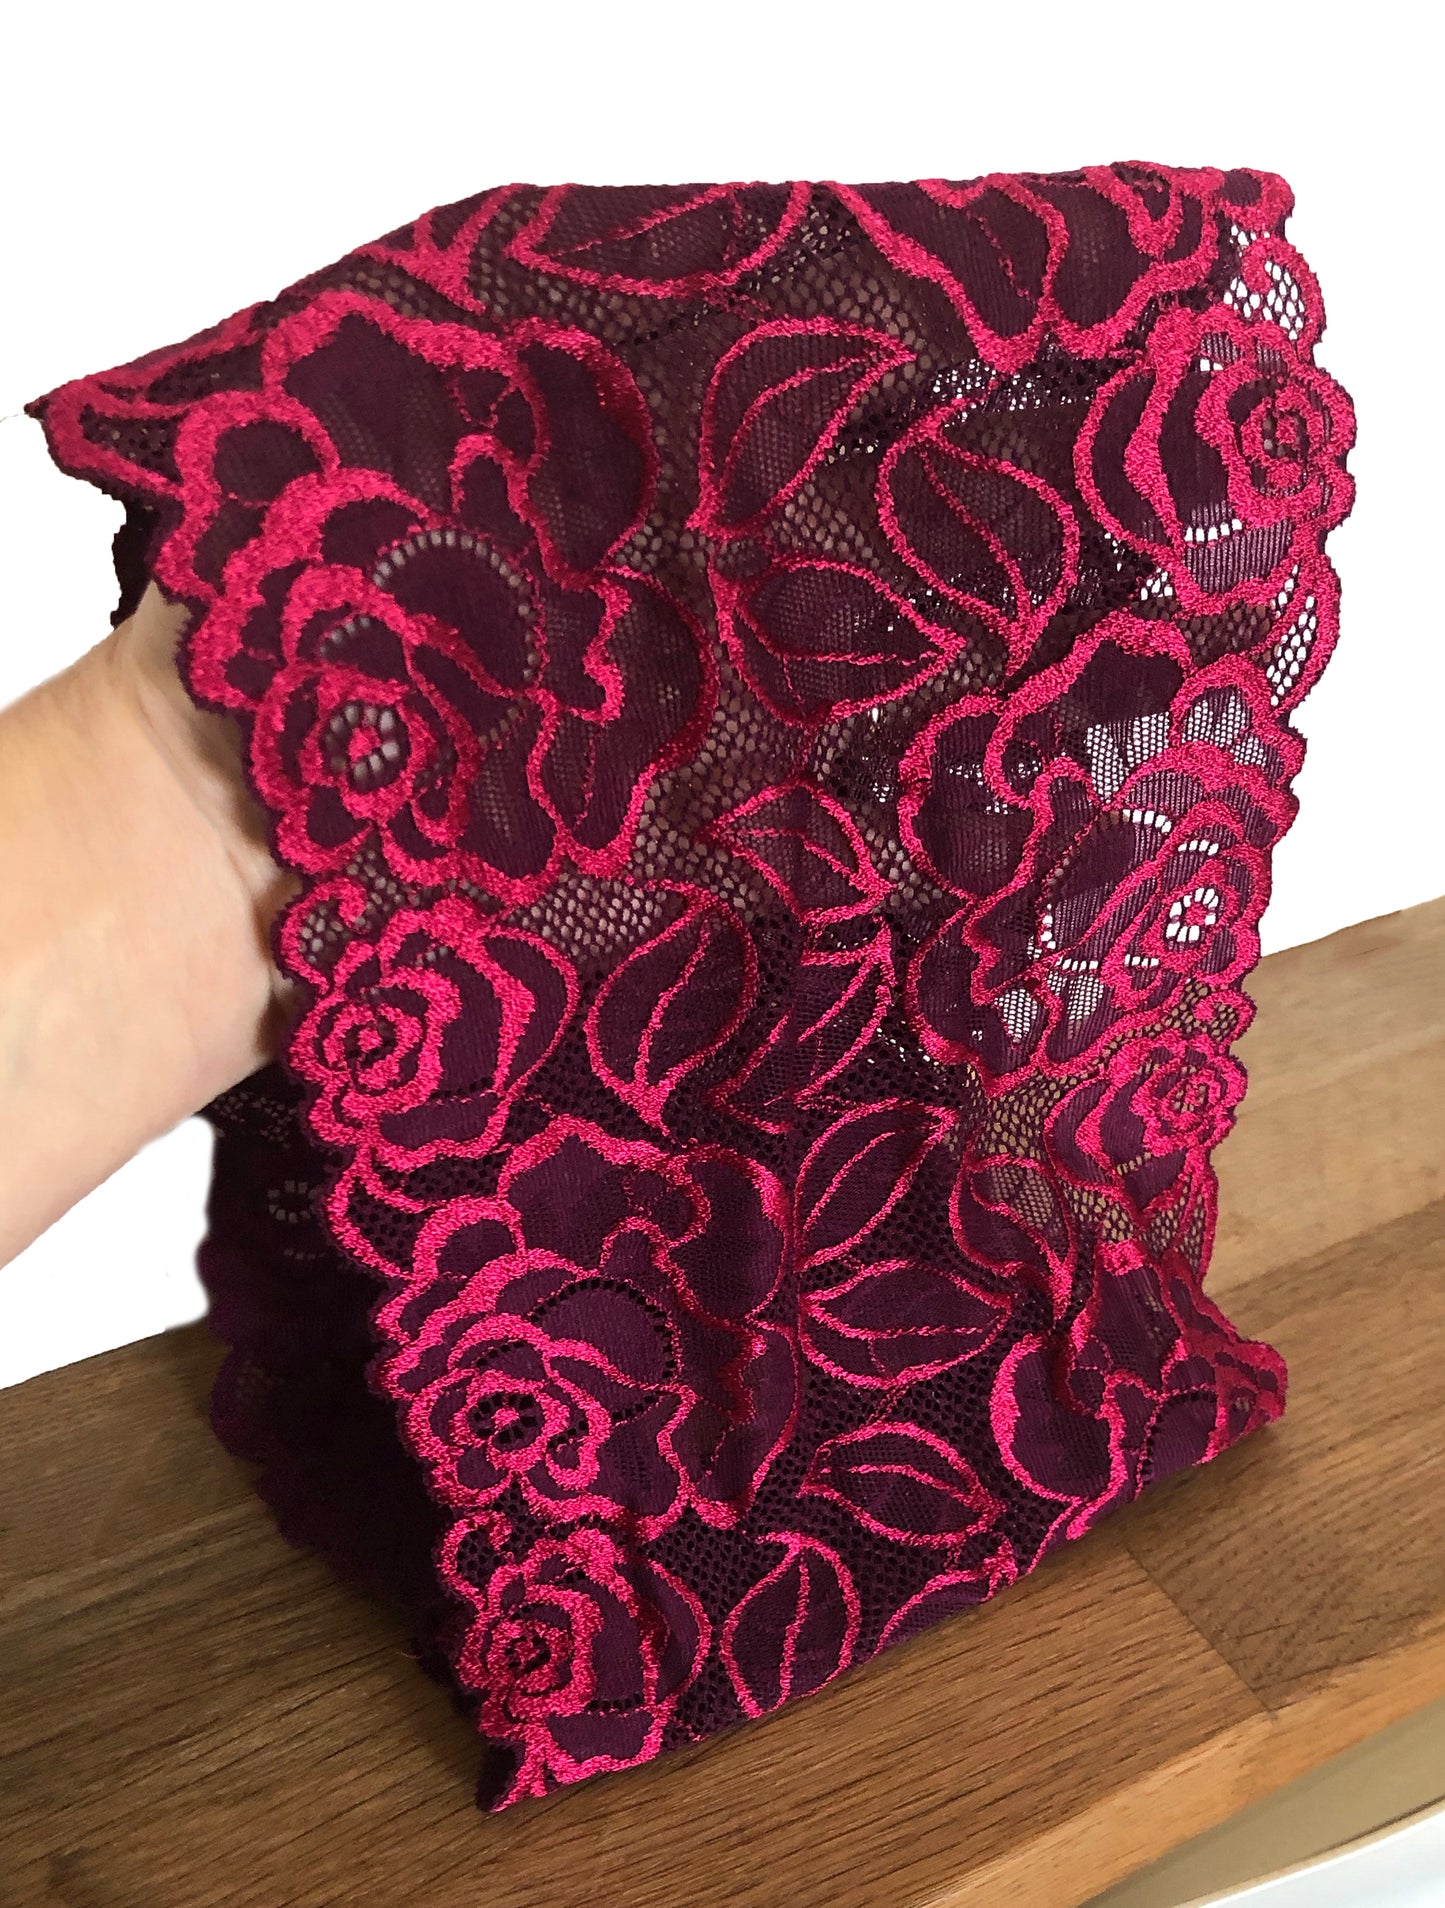 Burgundy red lace headband super wide